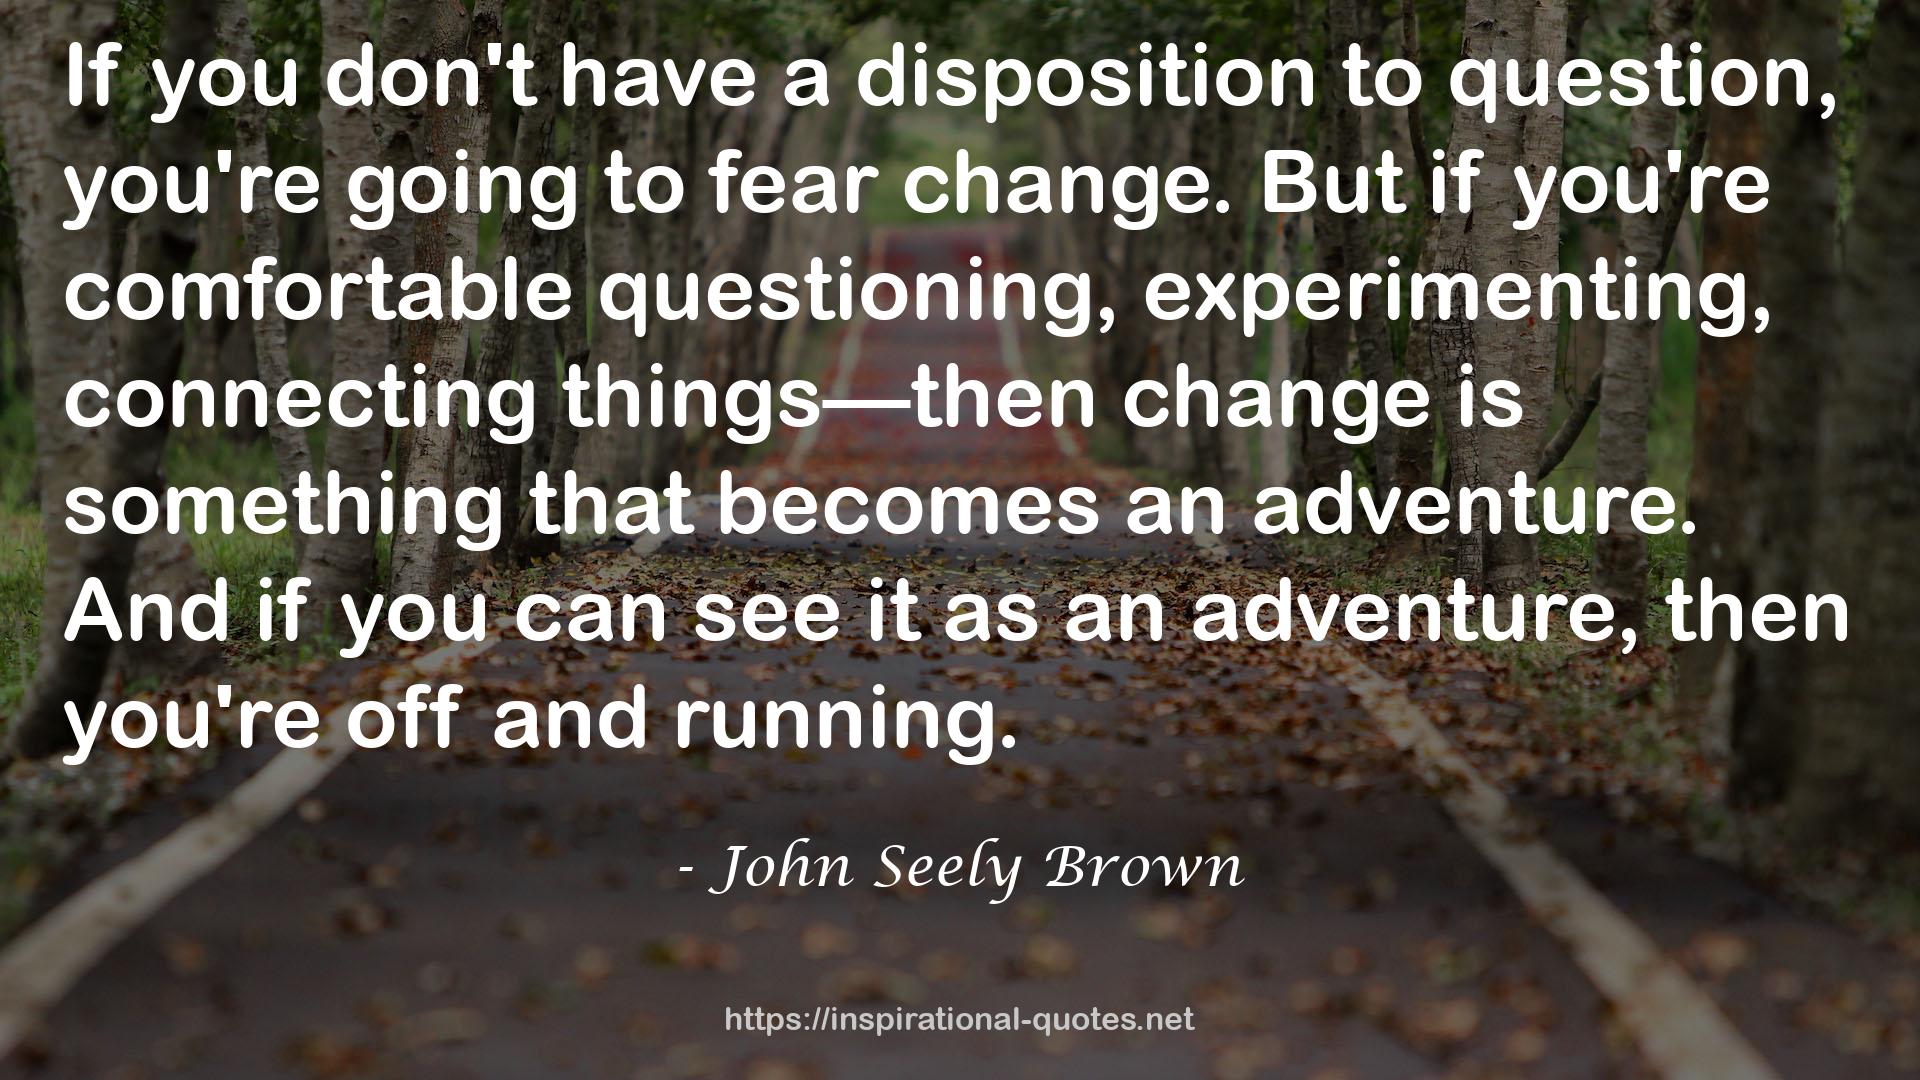 John Seely Brown QUOTES